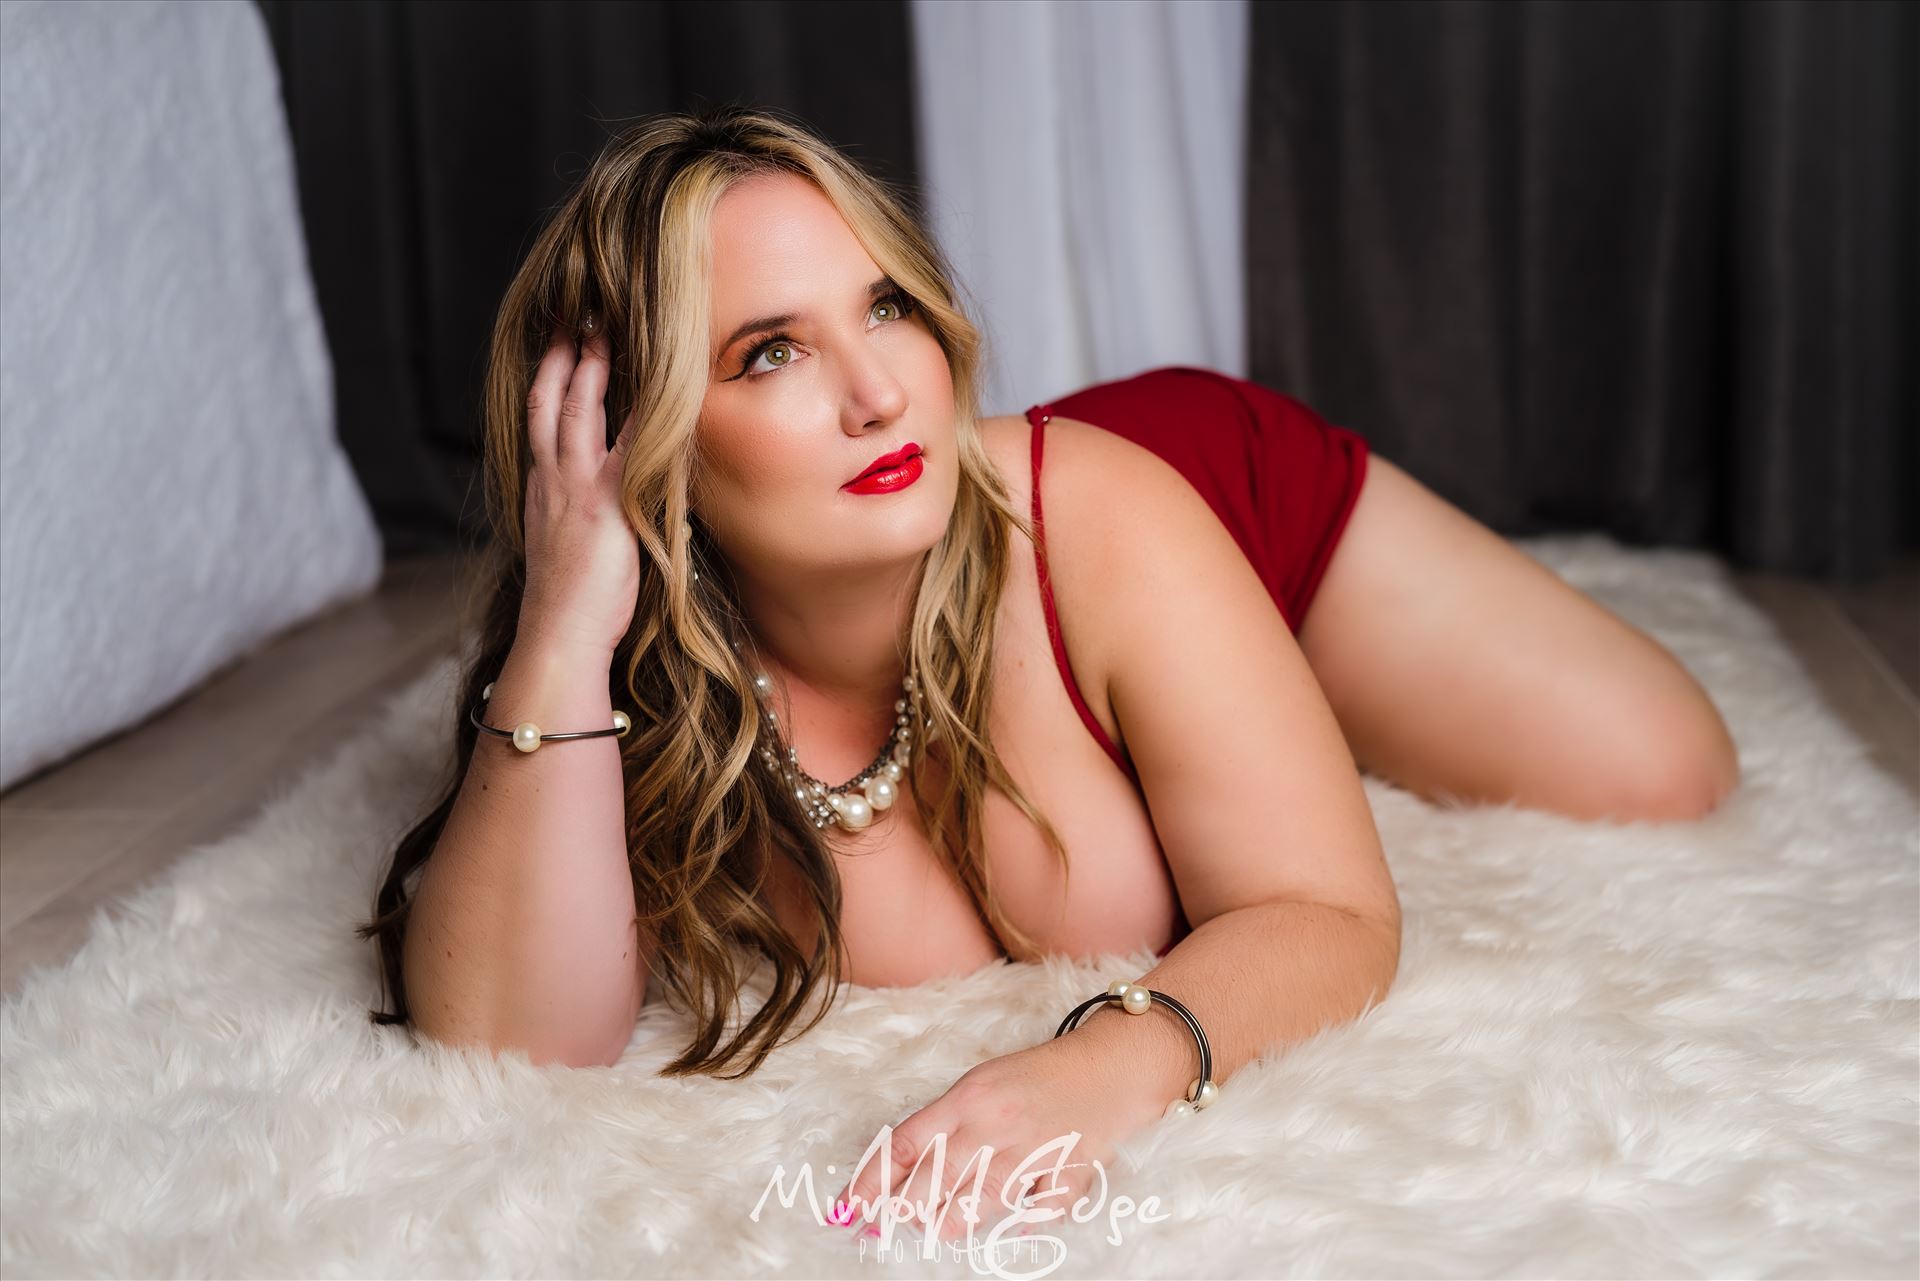 10 Things You Think About Boudoir Photography That Are Completely Wrong - And How I Fix That